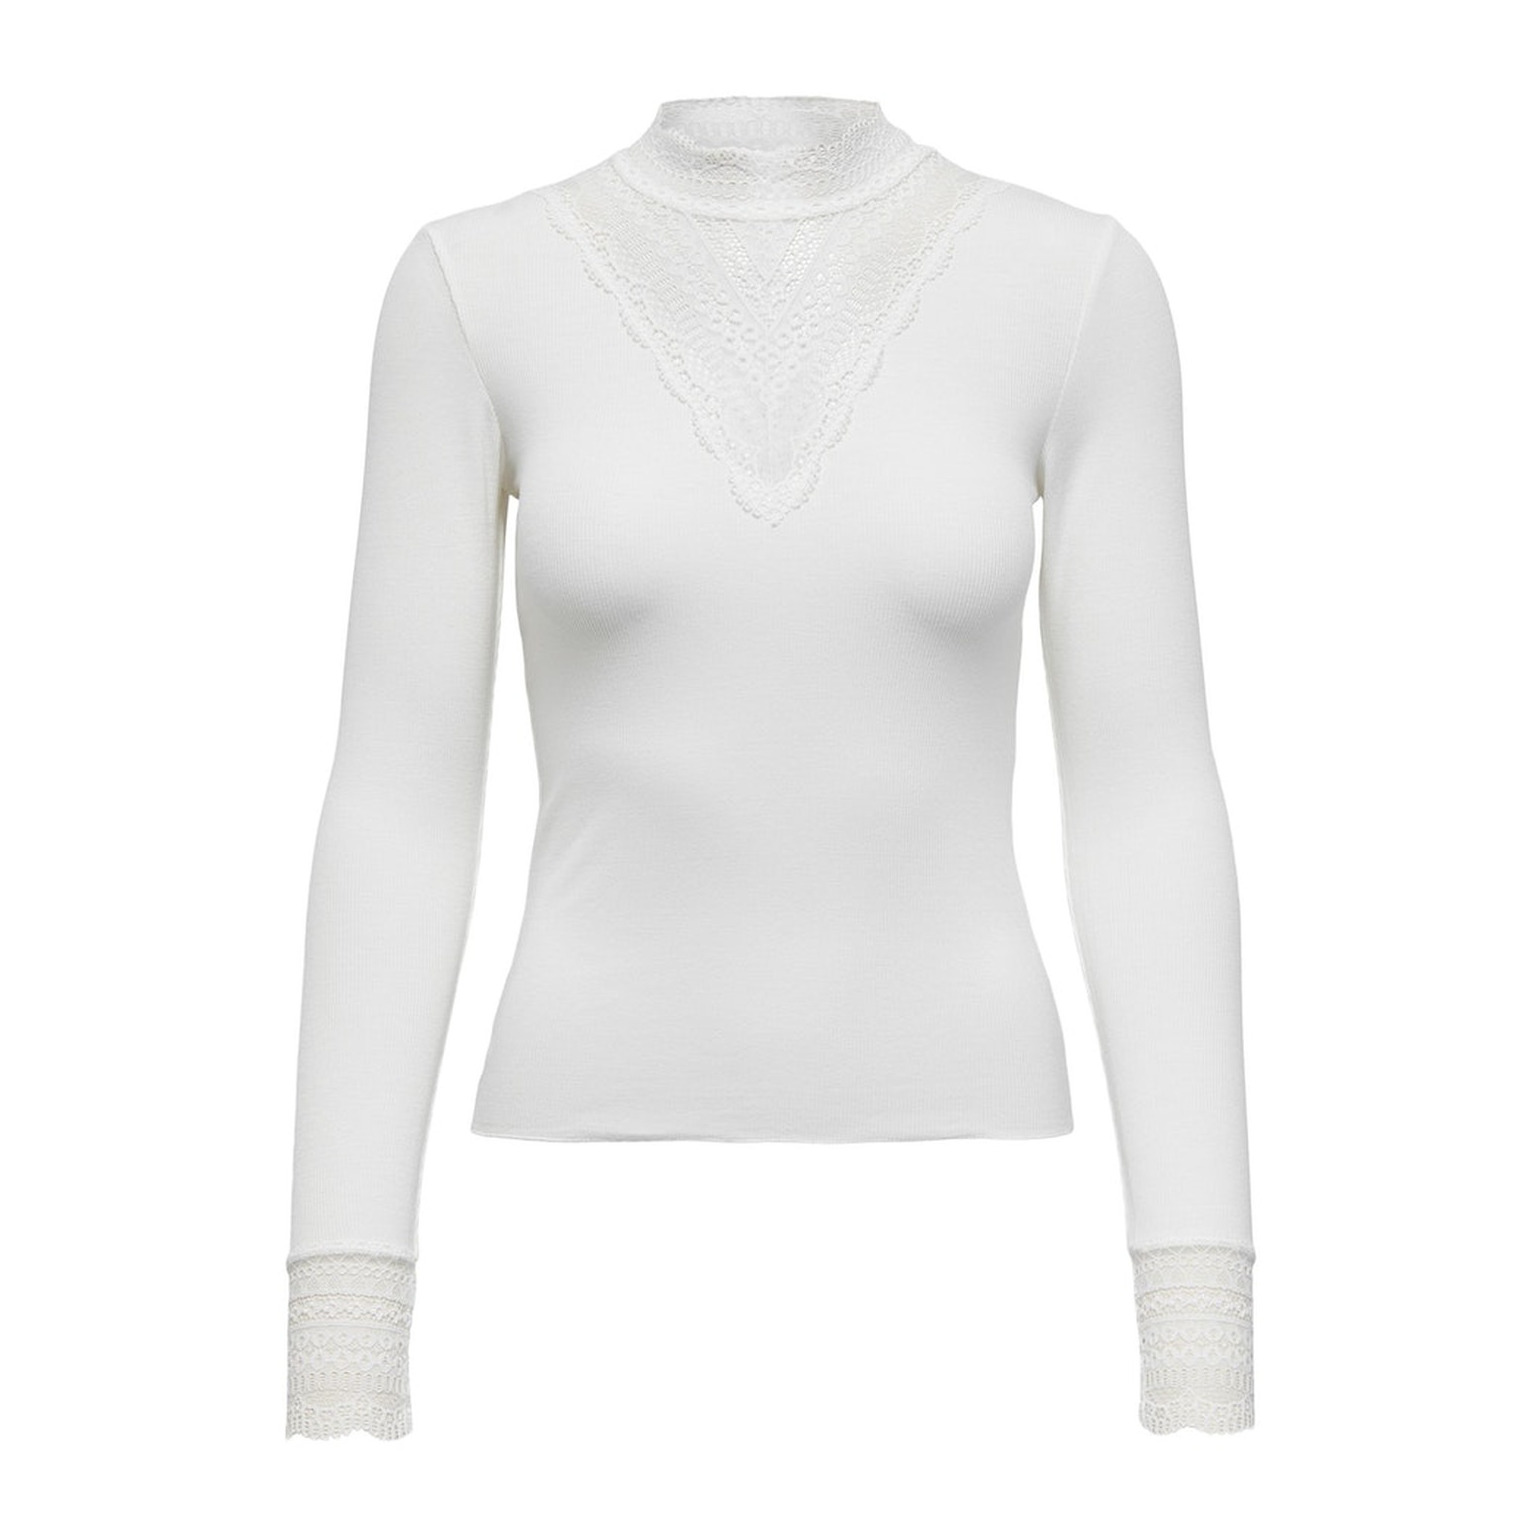 Mücke Shirts NECK ONLTILDE ONLY Schuh | LACE TO L/S & Tops HIGH